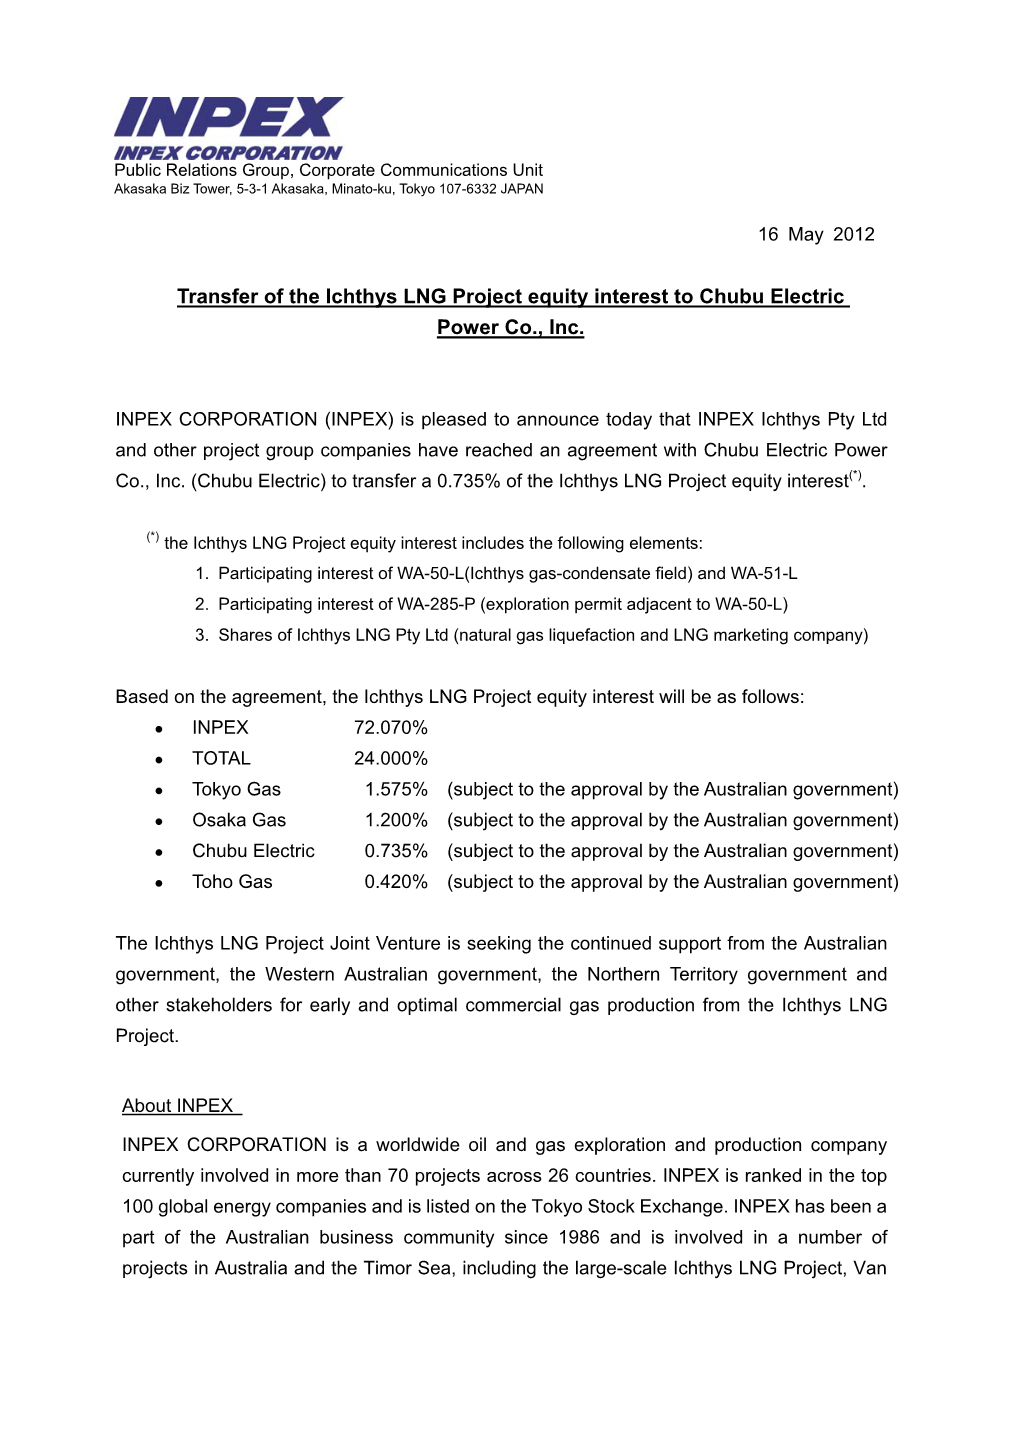 Transfer of the Ichthys LNG Project Equity Interest to Chubu Electric Power Co., Inc